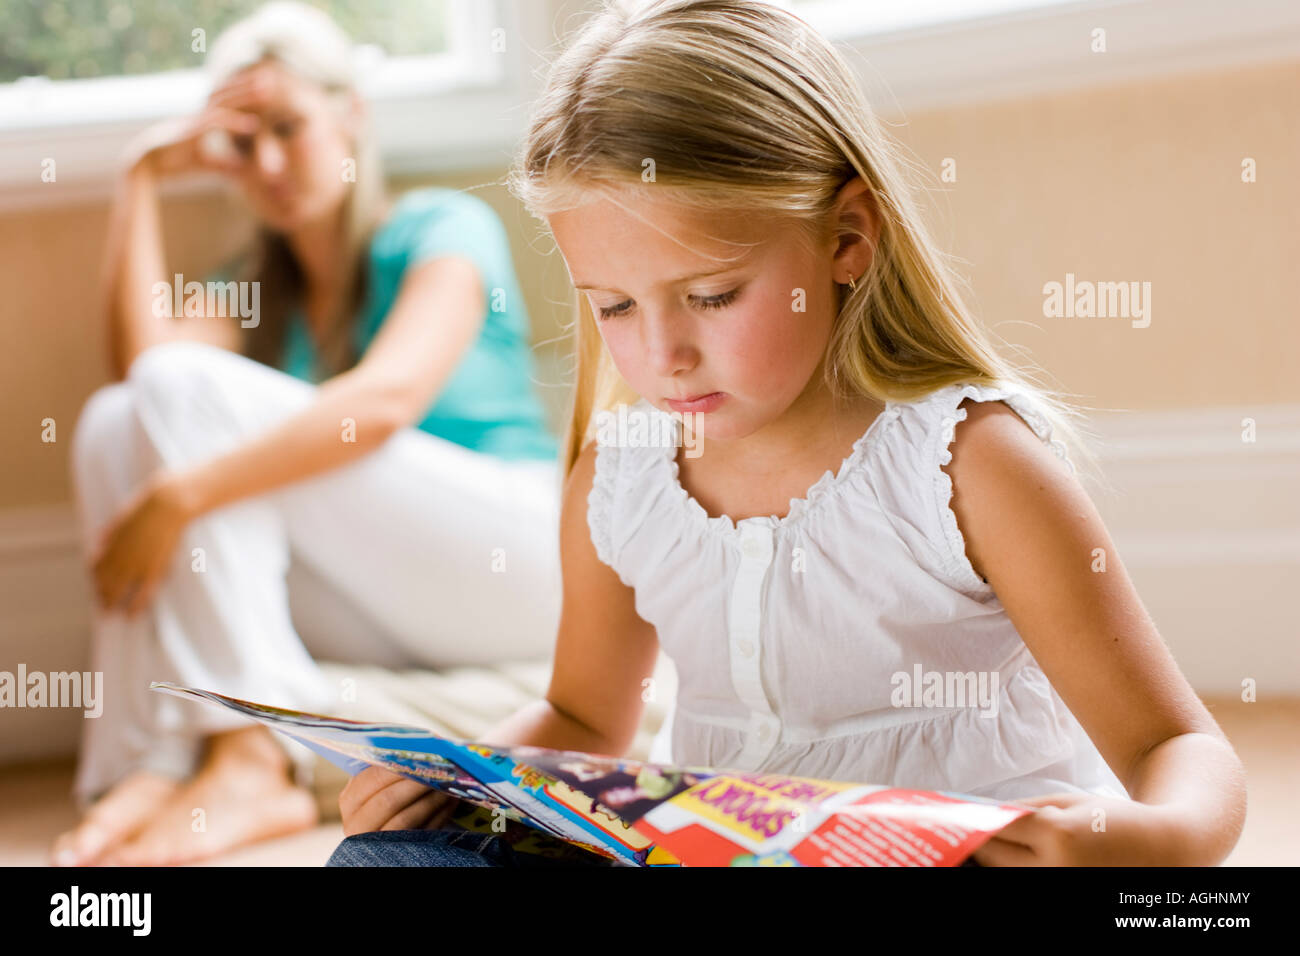 mother looking worried with her daughter in the foreground Stock Photo